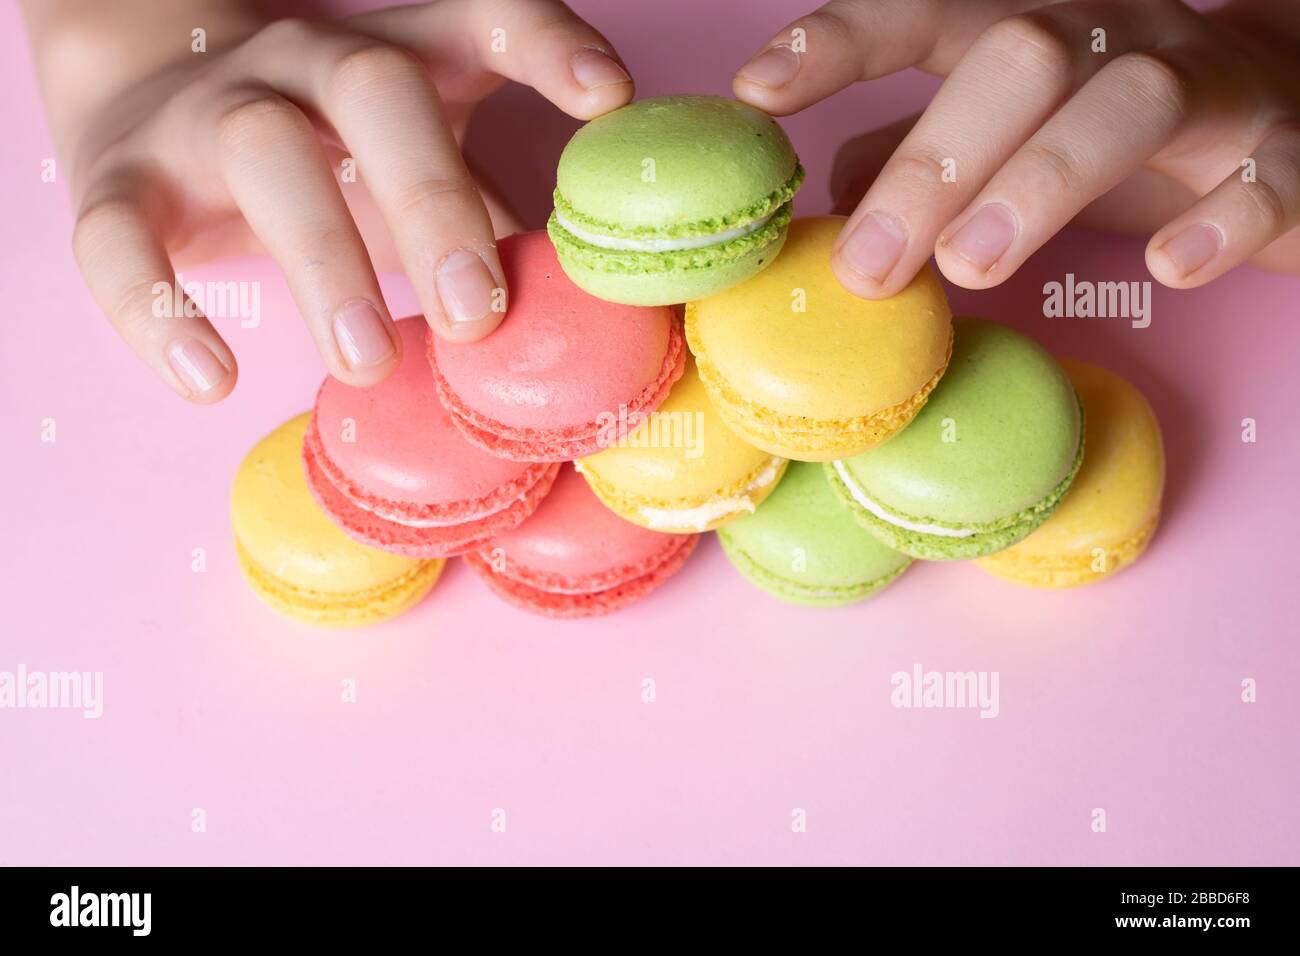 Boy holding colorful French macarons in hands, pyramid concept Stock Photo